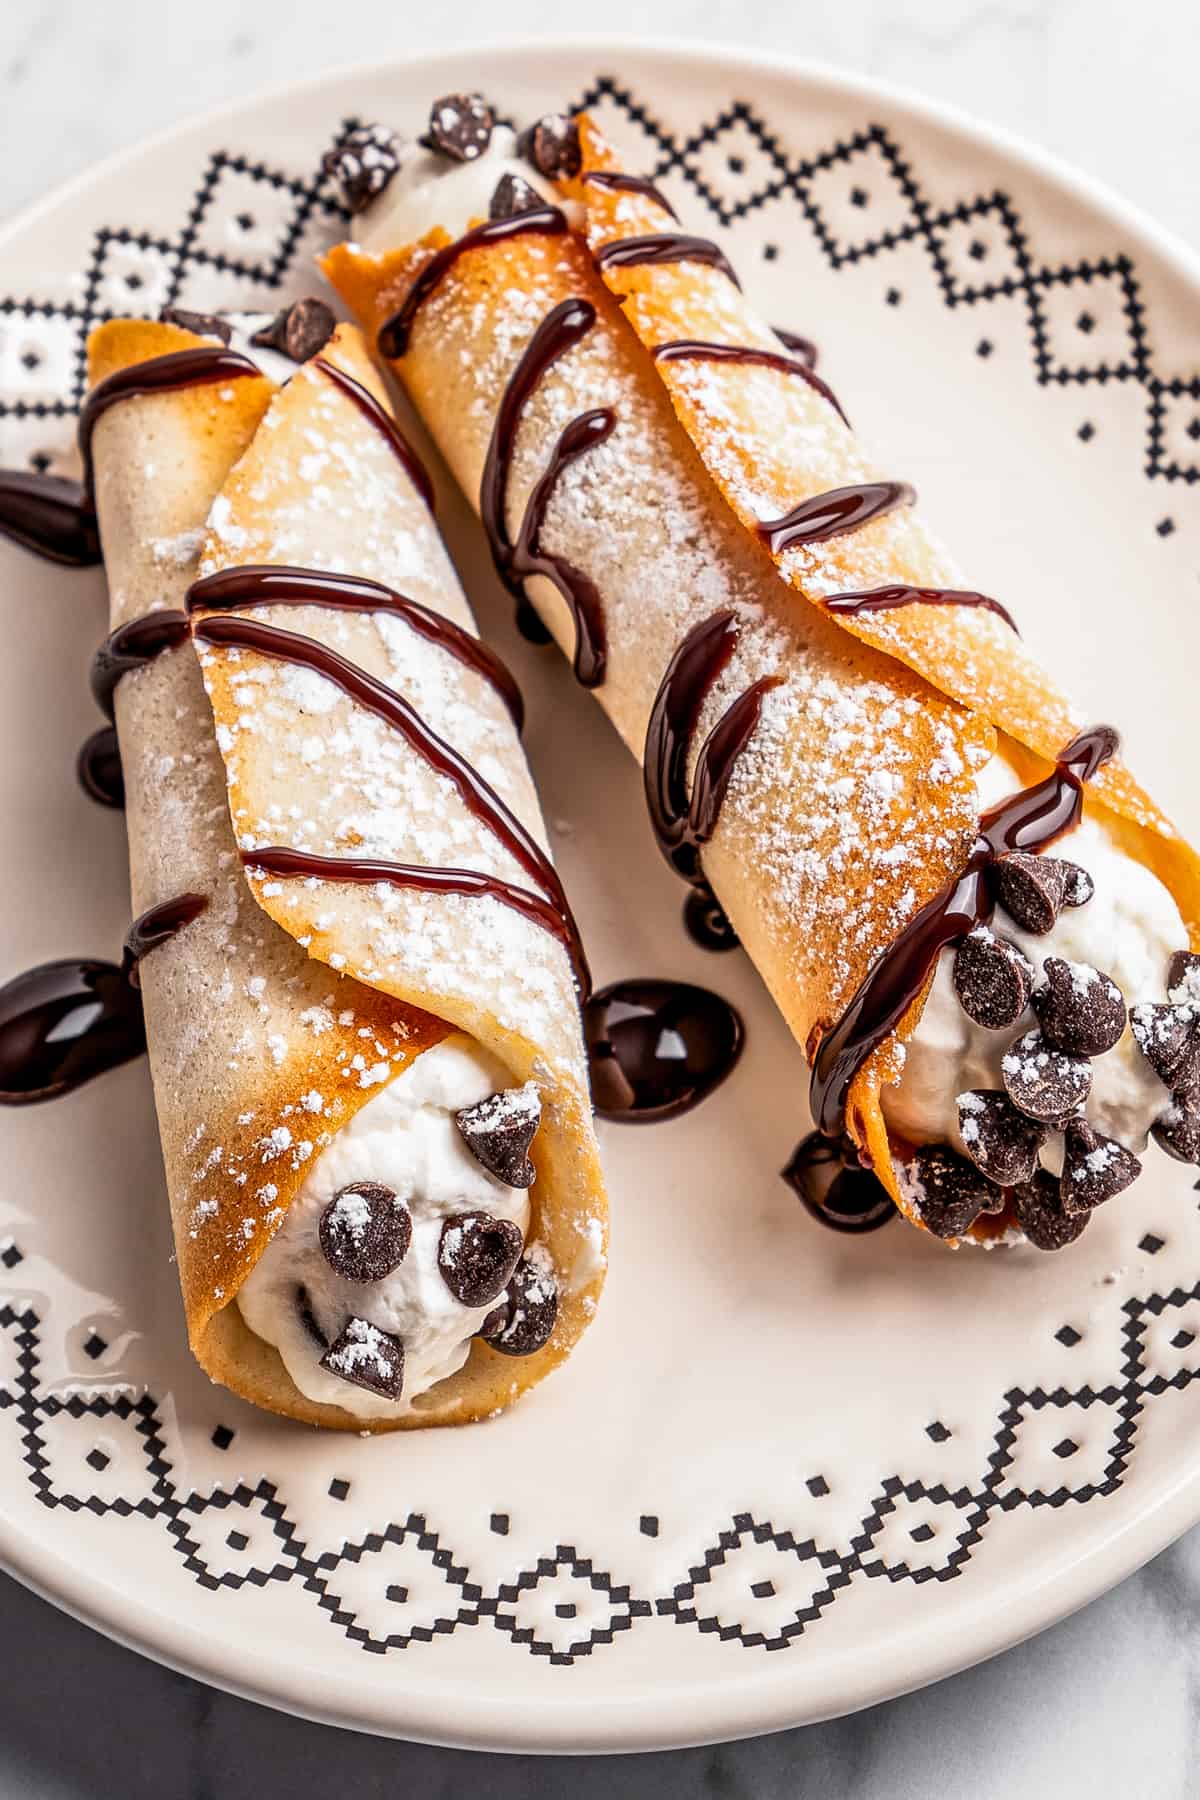 Two cannolis on a plate with chocolate drizzled on top.